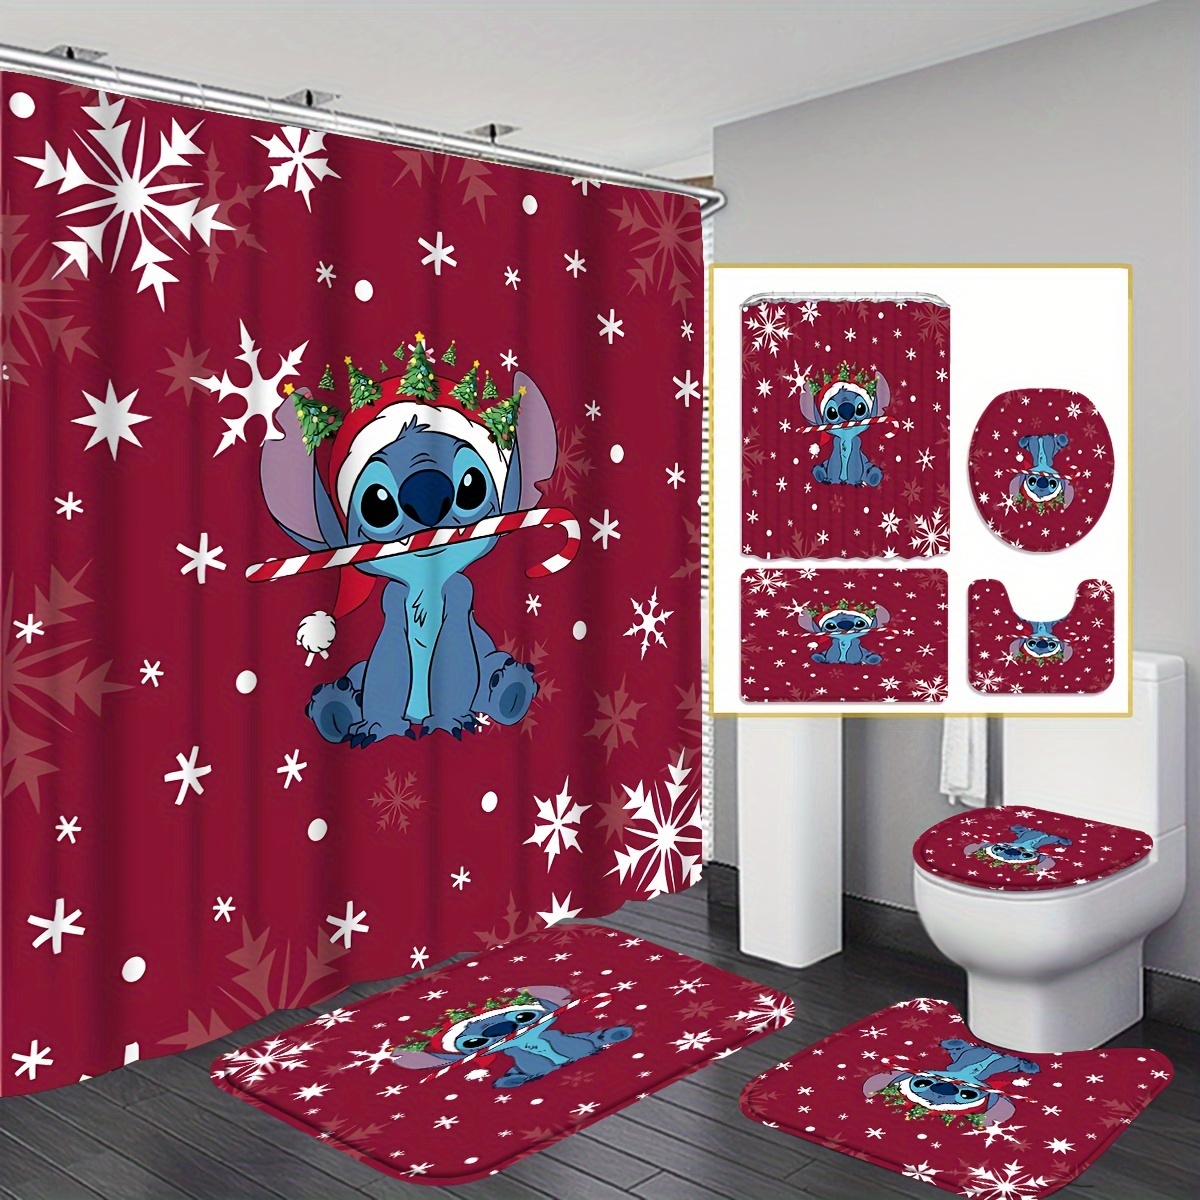 

1/4pcs Snowflake Stitch Pattern Shower Curtain Set With Hooks, Waterproof Shower Curtain, Toilet Cover Mat, Non-slip Bathroom Rug, Water Absorbent Bath Mat, Bathroom Accessories, Home Decor